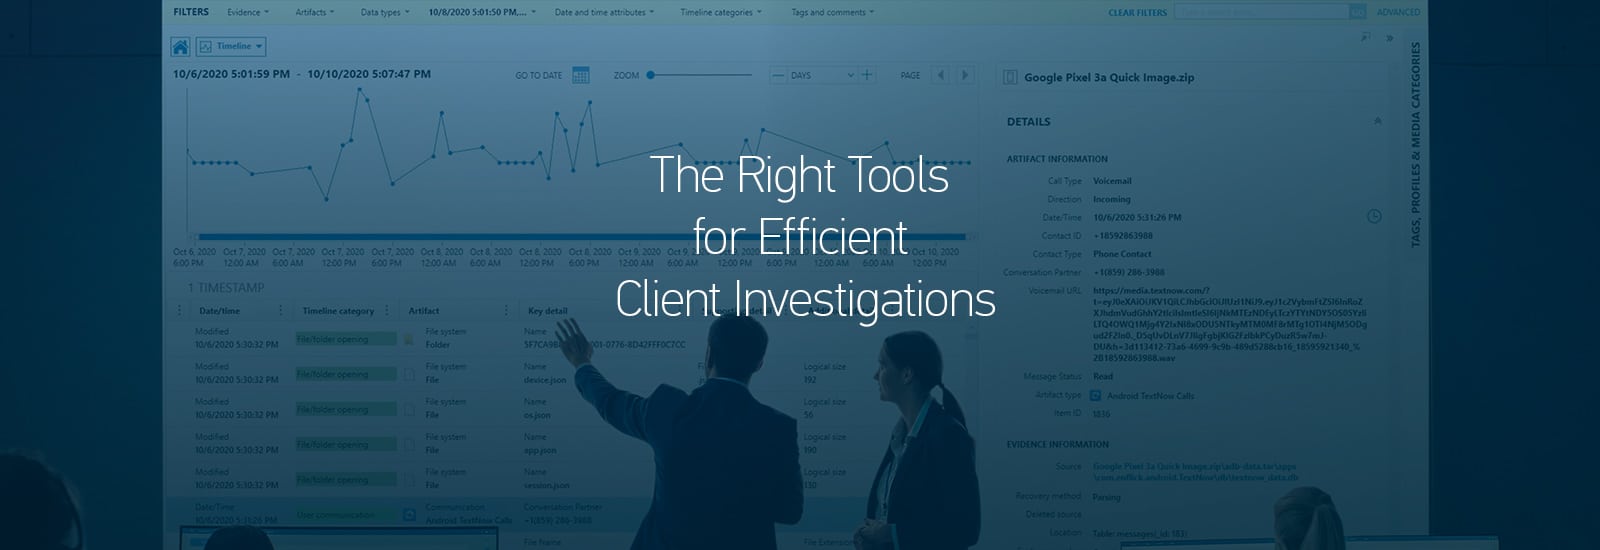 A decorative header for "The Right Tools for Efficient Client Investigations" blog post.